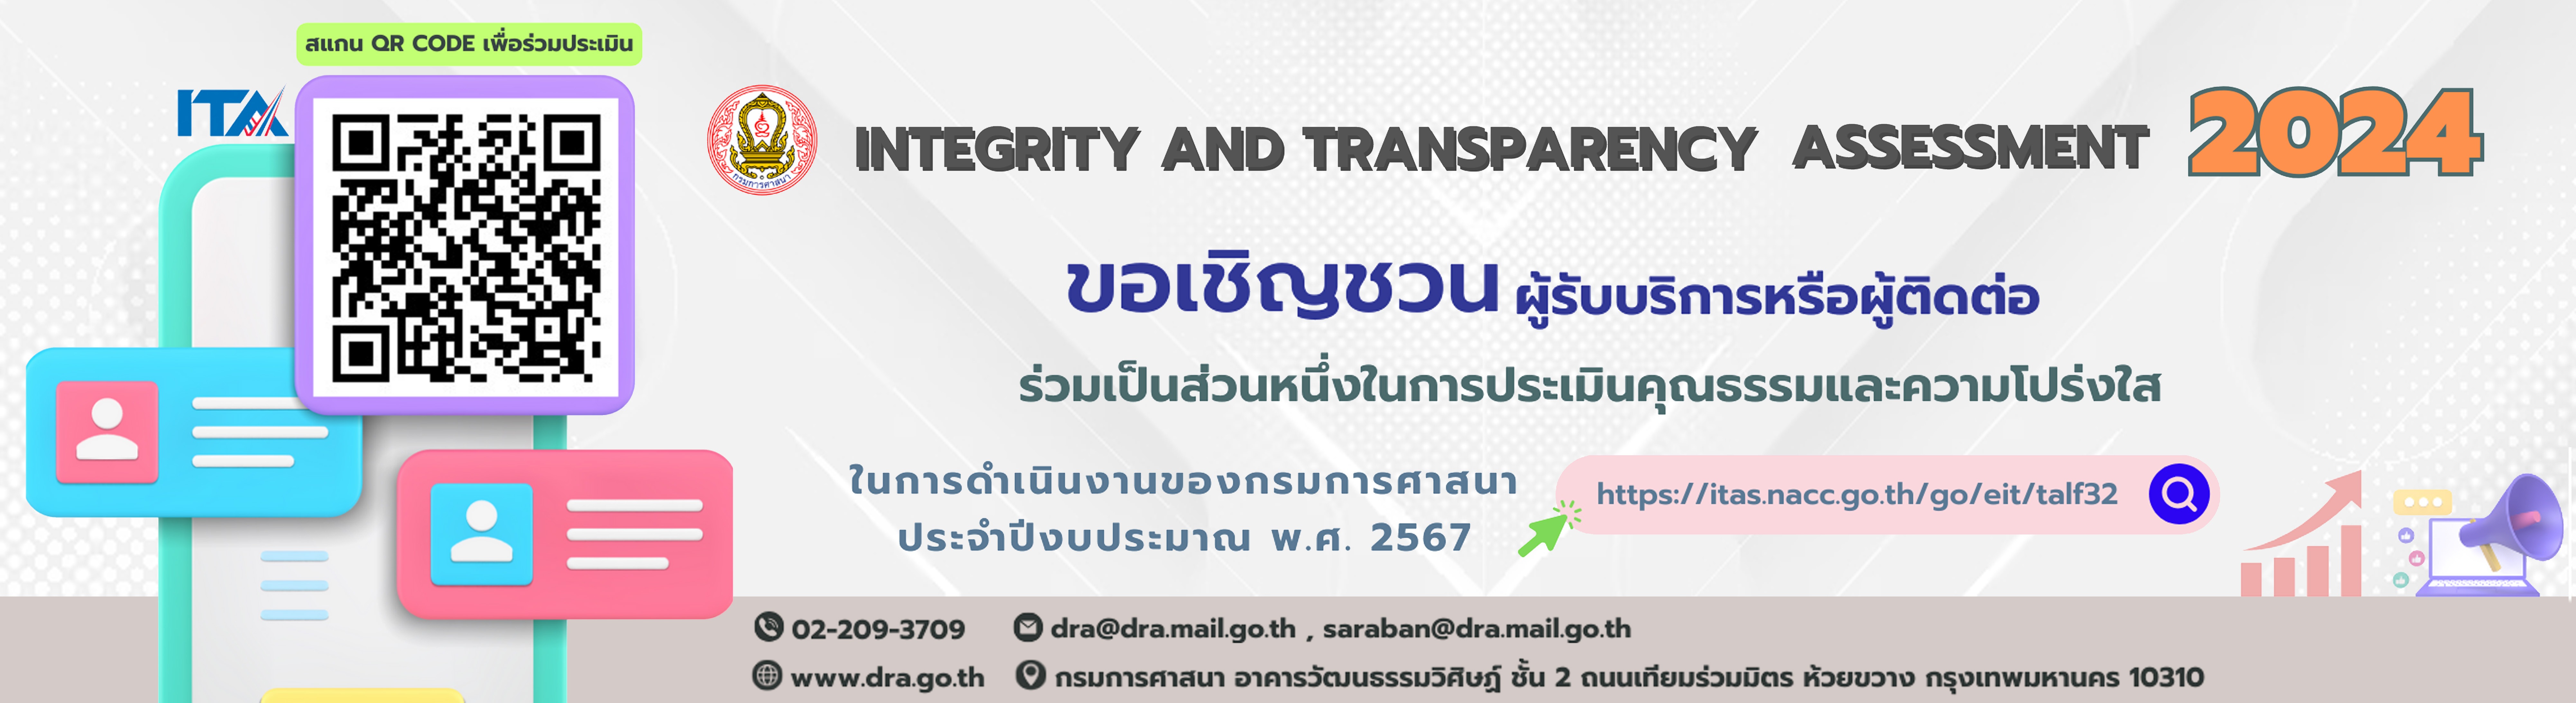 INTEGRITY AND TRANSPARENCY ASSESSMENT 2024